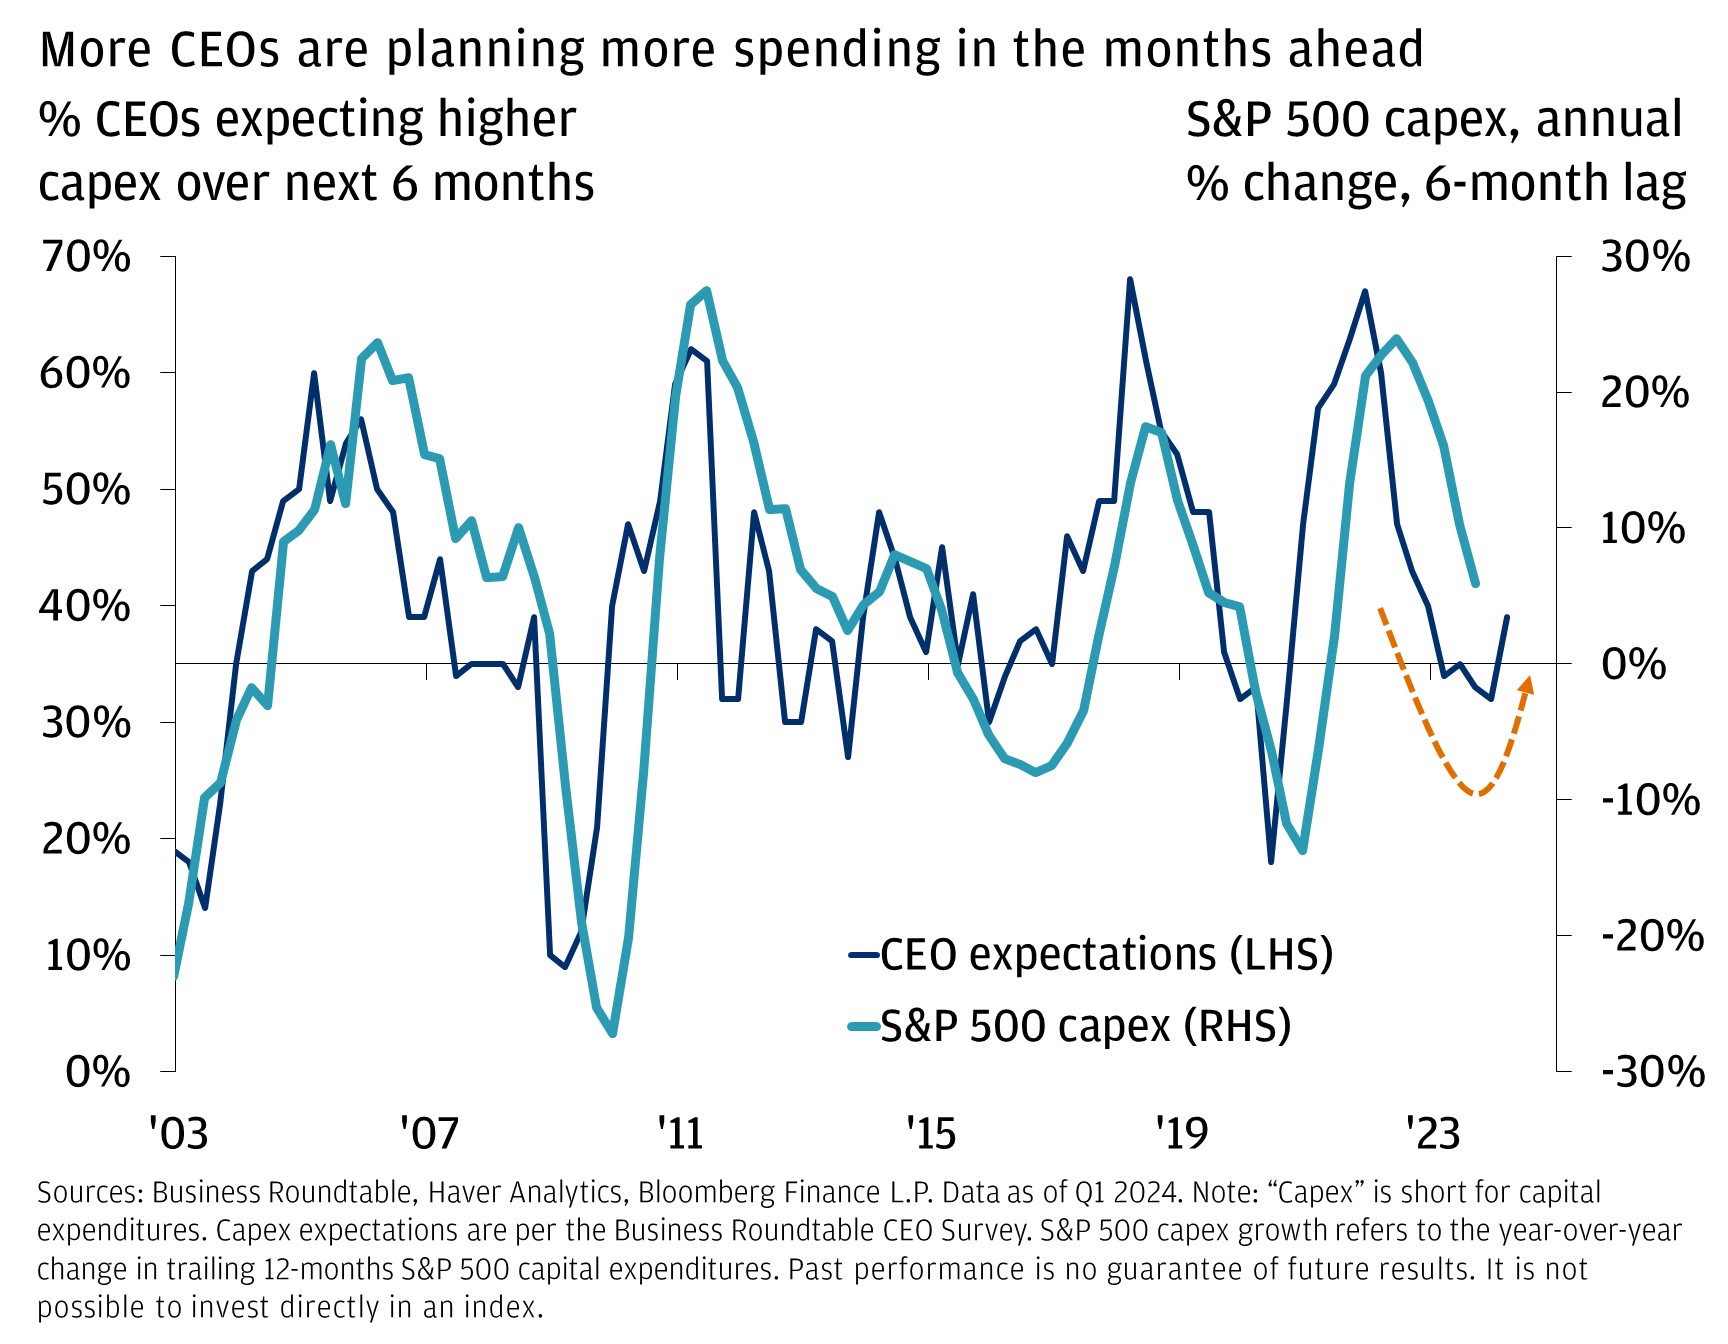 More CEOs are planning more spending in the months ahead